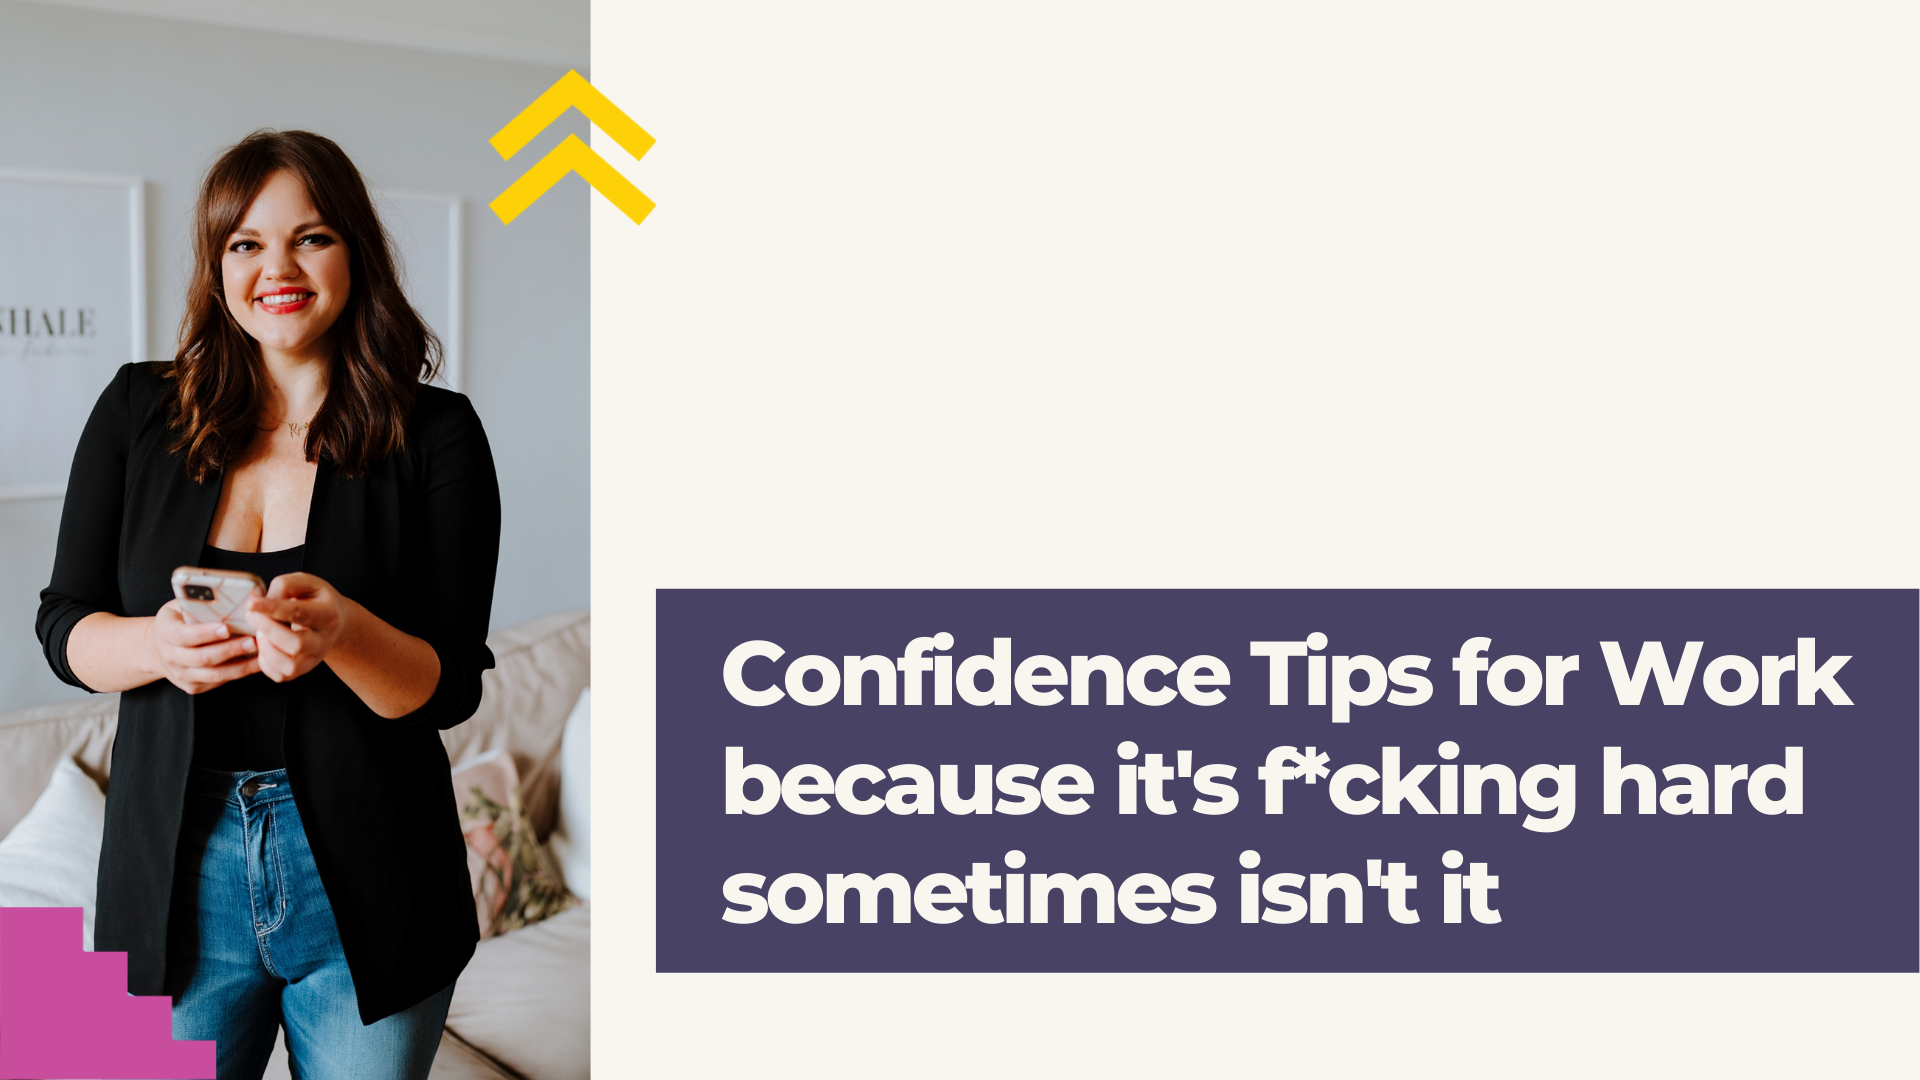 Confidence Tips for Work because it’s f*cking hard sometimes isn’t it